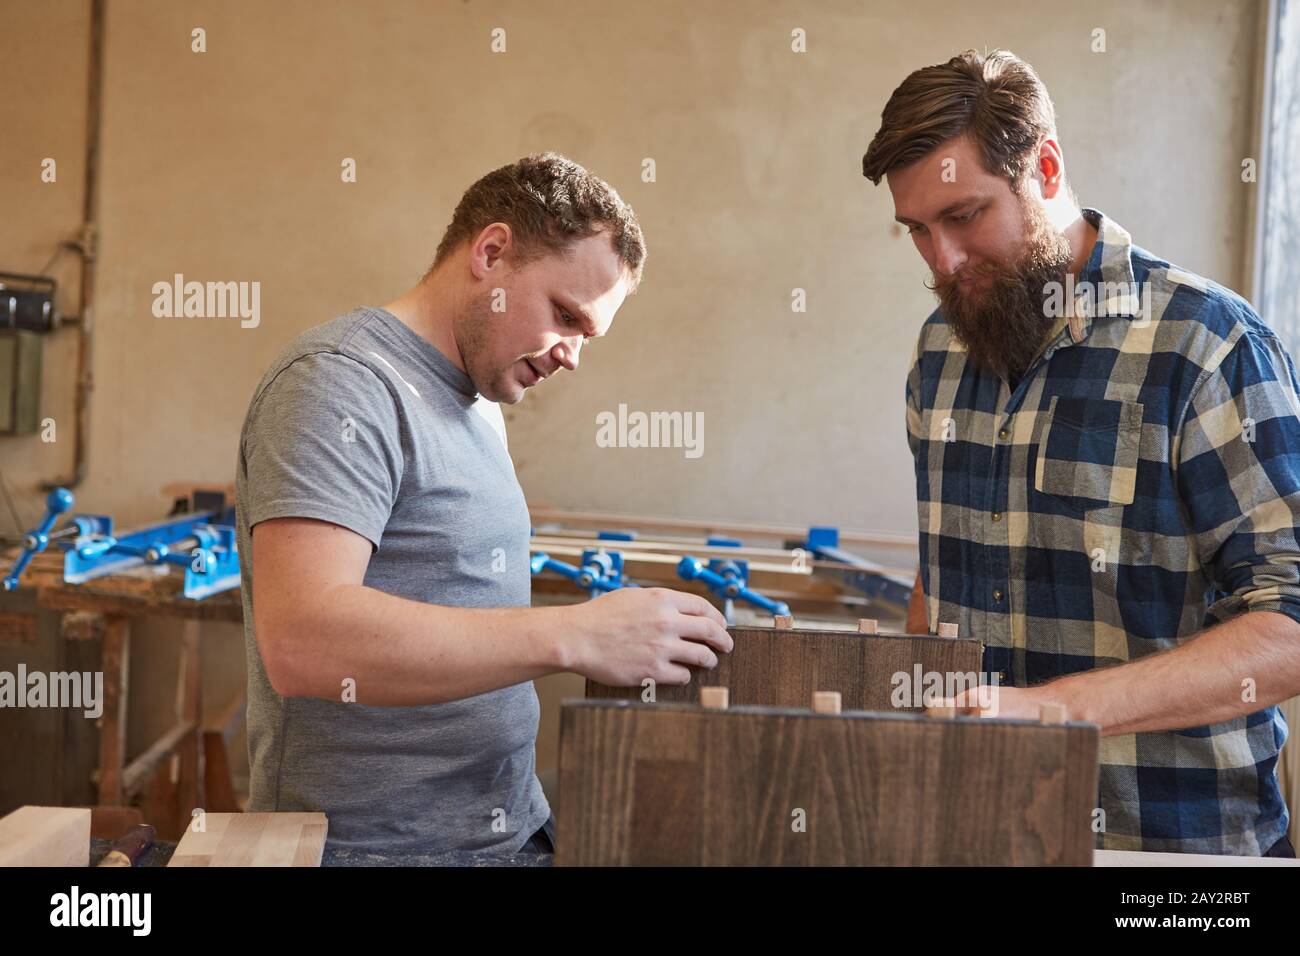 Apprentice in training in a joinery helps build furniture out of wood Stock Photo